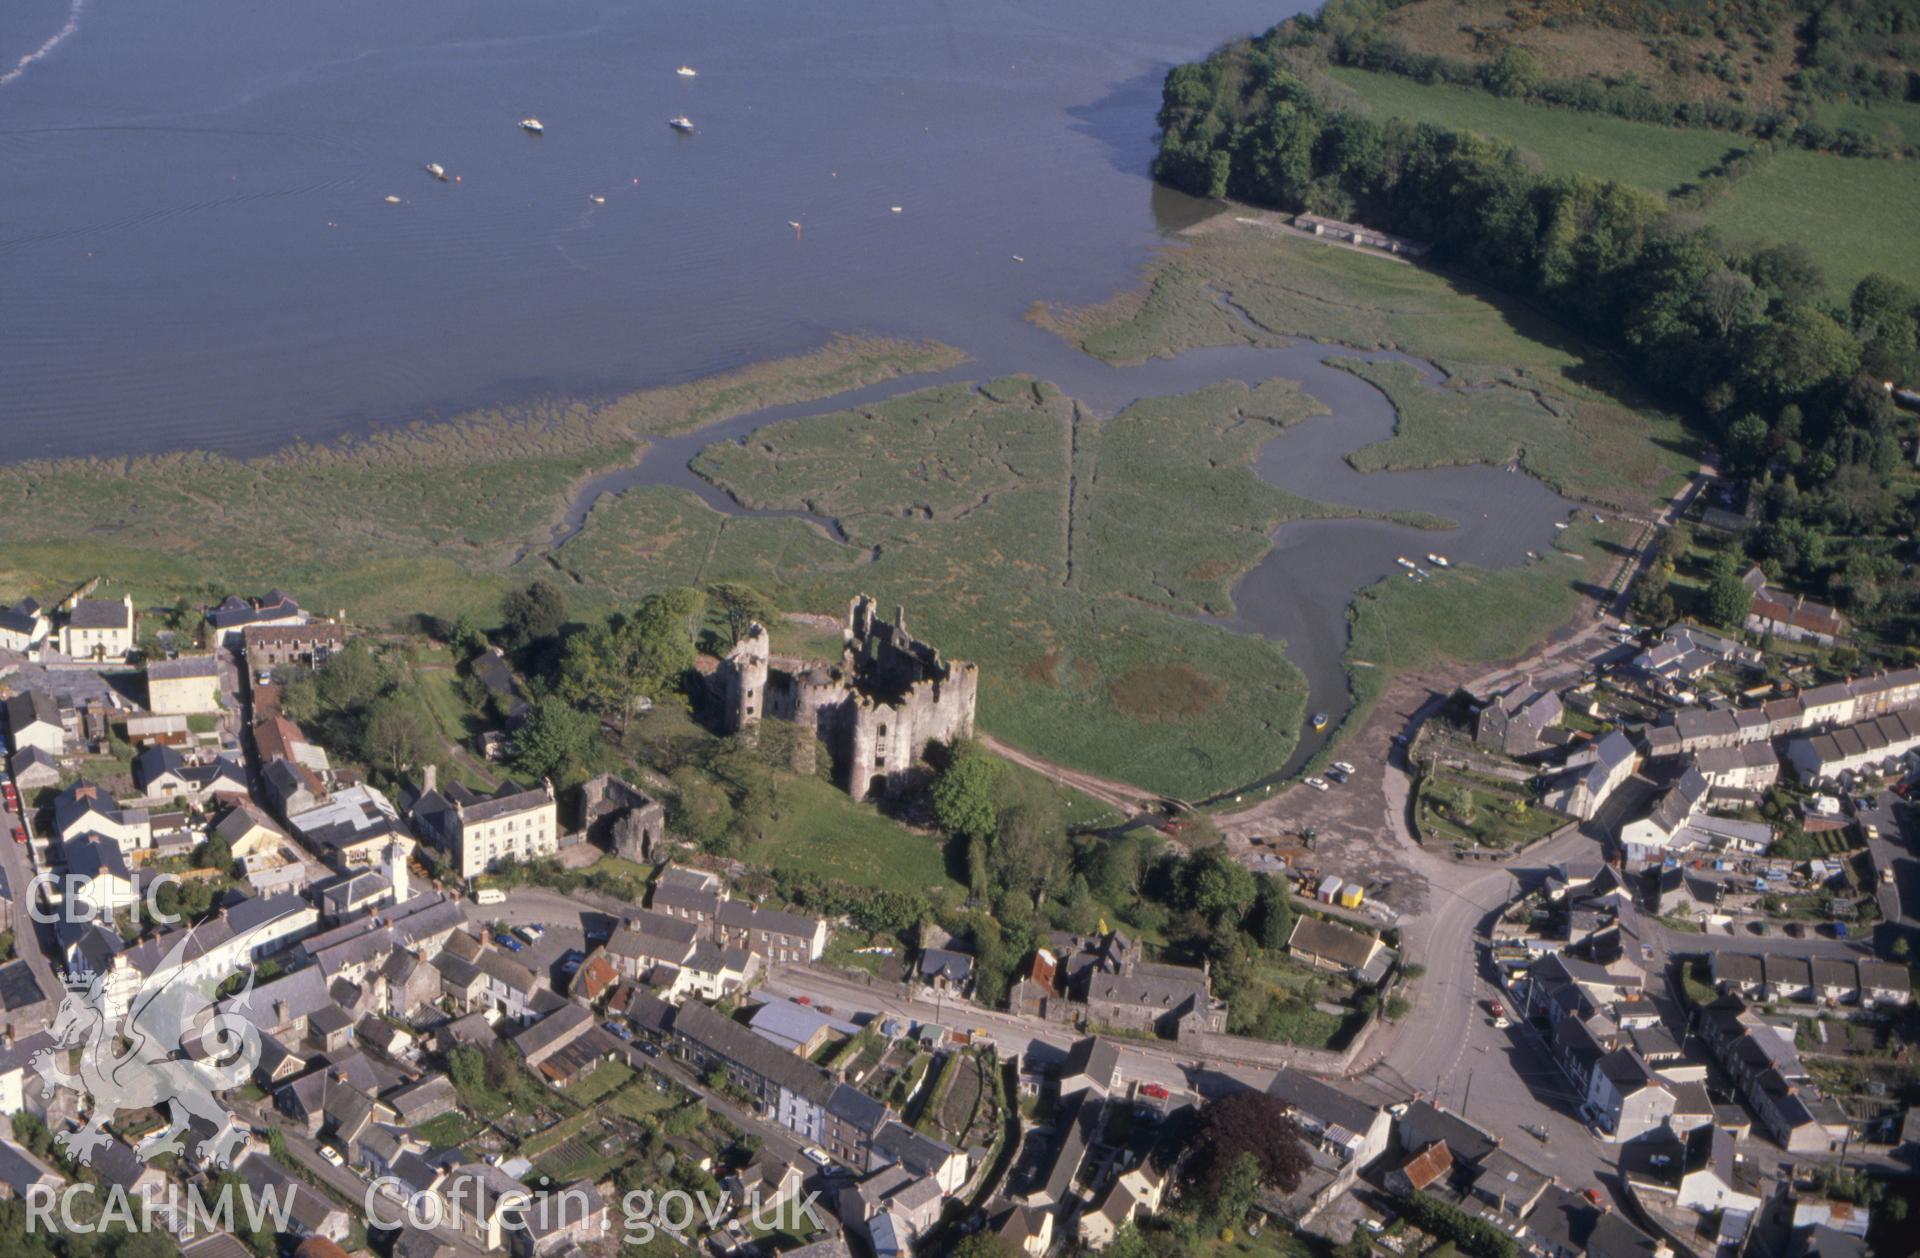 Slide of RCAHMW colour oblique aerial photograph of Laugharne Castle, taken by C.R. Musson, 18/5/1989.